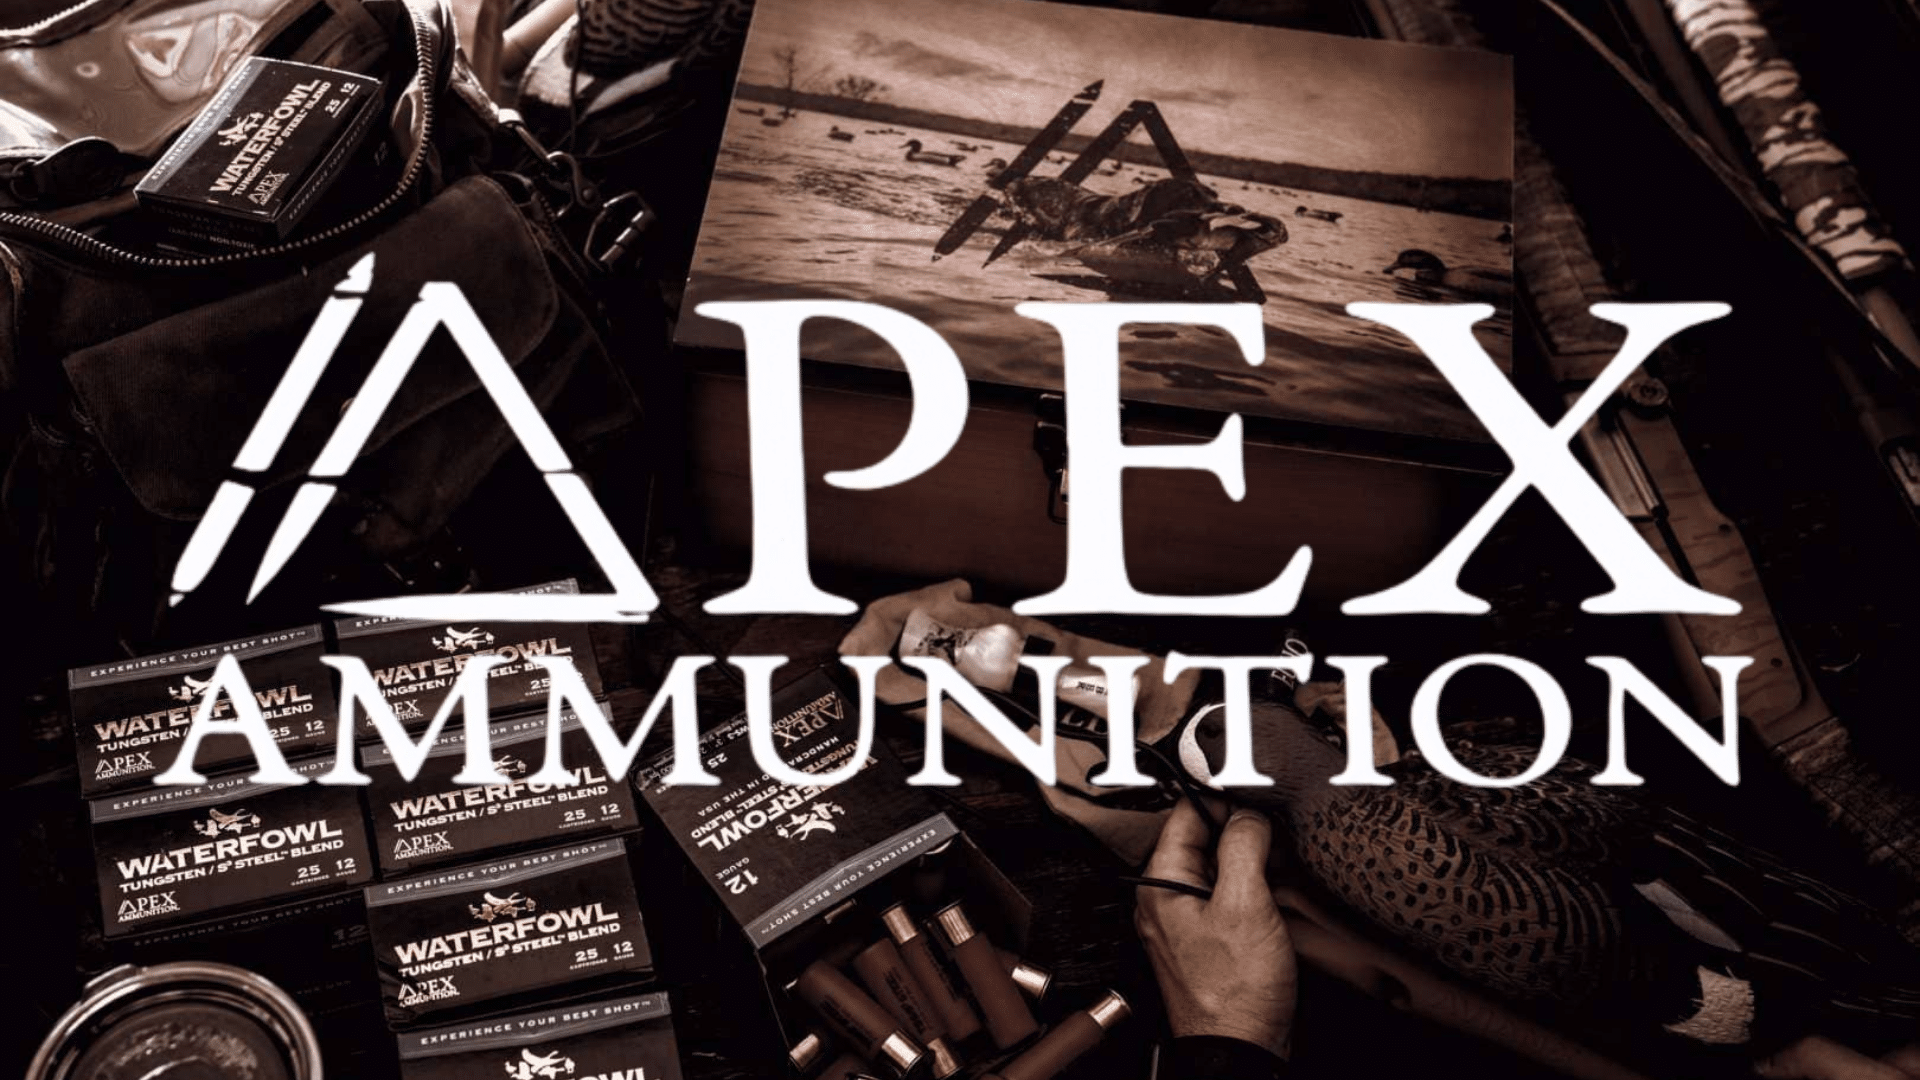 APEX Ammunition to create 64 jobs with $4.45M expansion - SuperTalk ...